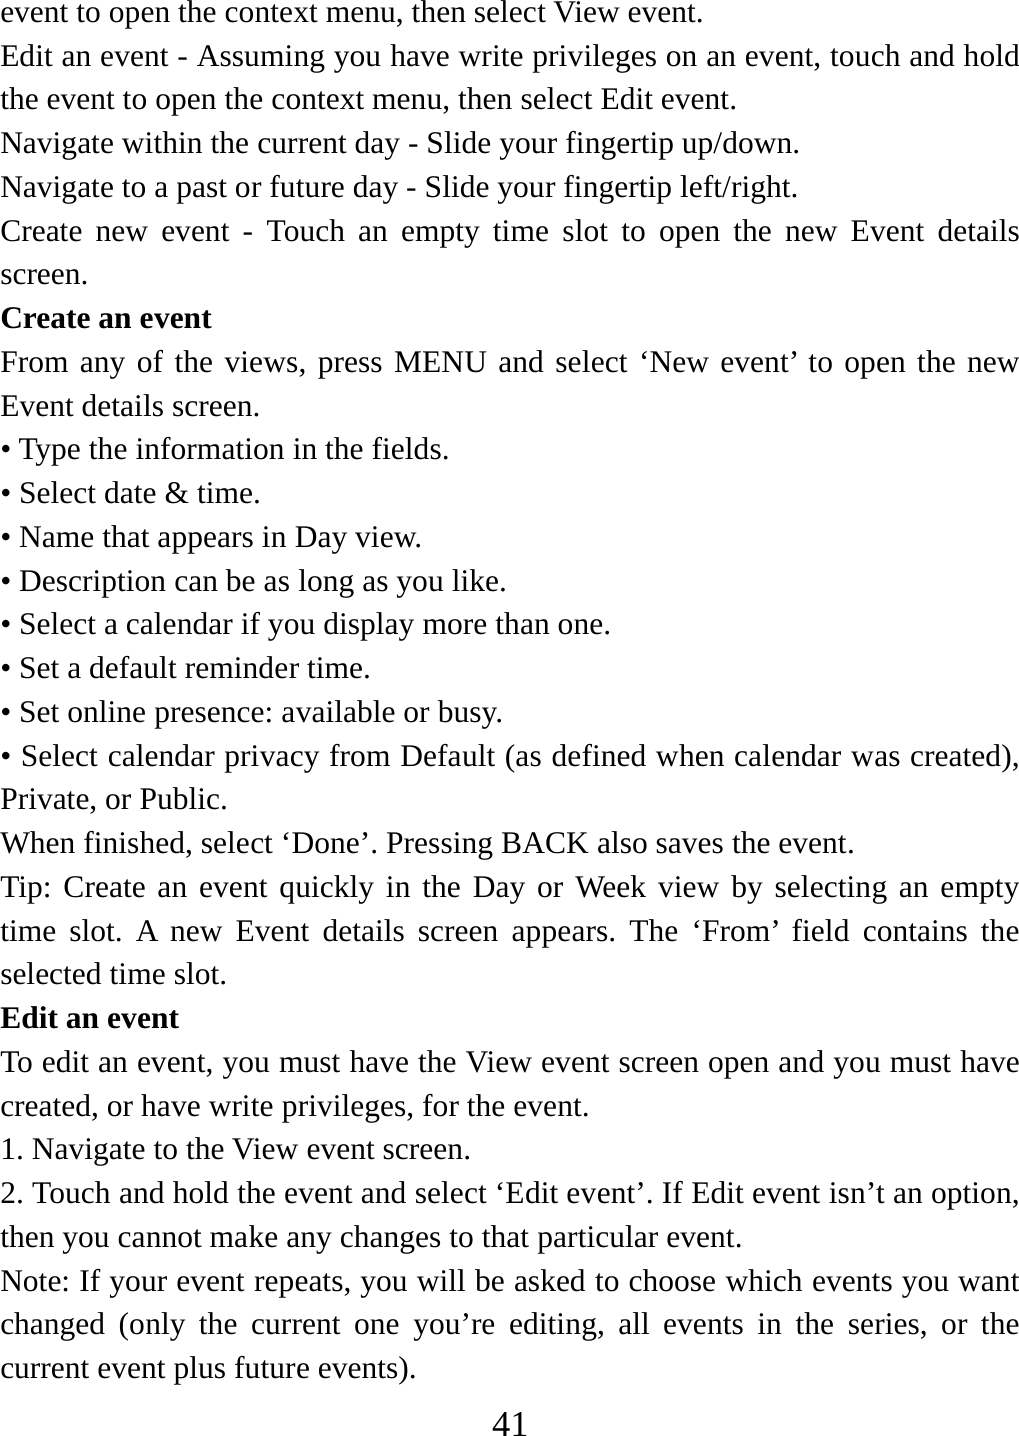   41event to open the context menu, then select View event.   Edit an event - Assuming you have write privileges on an event, touch and hold the event to open the context menu, then select Edit event.   Navigate within the current day - Slide your fingertip up/down.   Navigate to a past or future day - Slide your fingertip left/right.   Create new event - Touch an empty time slot to open the new Event details screen.  Create an event   From any of the views, press MENU and select ‘New event’ to open the new Event details screen.   • Type the information in the fields.   • Select date &amp; time.   • Name that appears in Day view.   • Description can be as long as you like. • Select a calendar if you display more than one.   • Set a default reminder time.   • Set online presence: available or busy.   • Select calendar privacy from Default (as defined when calendar was created), Private, or Public.   When finished, select ‘Done’. Pressing BACK also saves the event.   Tip: Create an event quickly in the Day or Week view by selecting an empty time slot. A new Event details screen appears. The ‘From’ field contains the selected time slot.   Edit an event   To edit an event, you must have the View event screen open and you must have created, or have write privileges, for the event.   1. Navigate to the View event screen. 2. Touch and hold the event and select ‘Edit event’. If Edit event isn’t an option, then you cannot make any changes to that particular event.   Note: If your event repeats, you will be asked to choose which events you want changed (only the current one you’re editing, all events in the series, or the current event plus future events).   